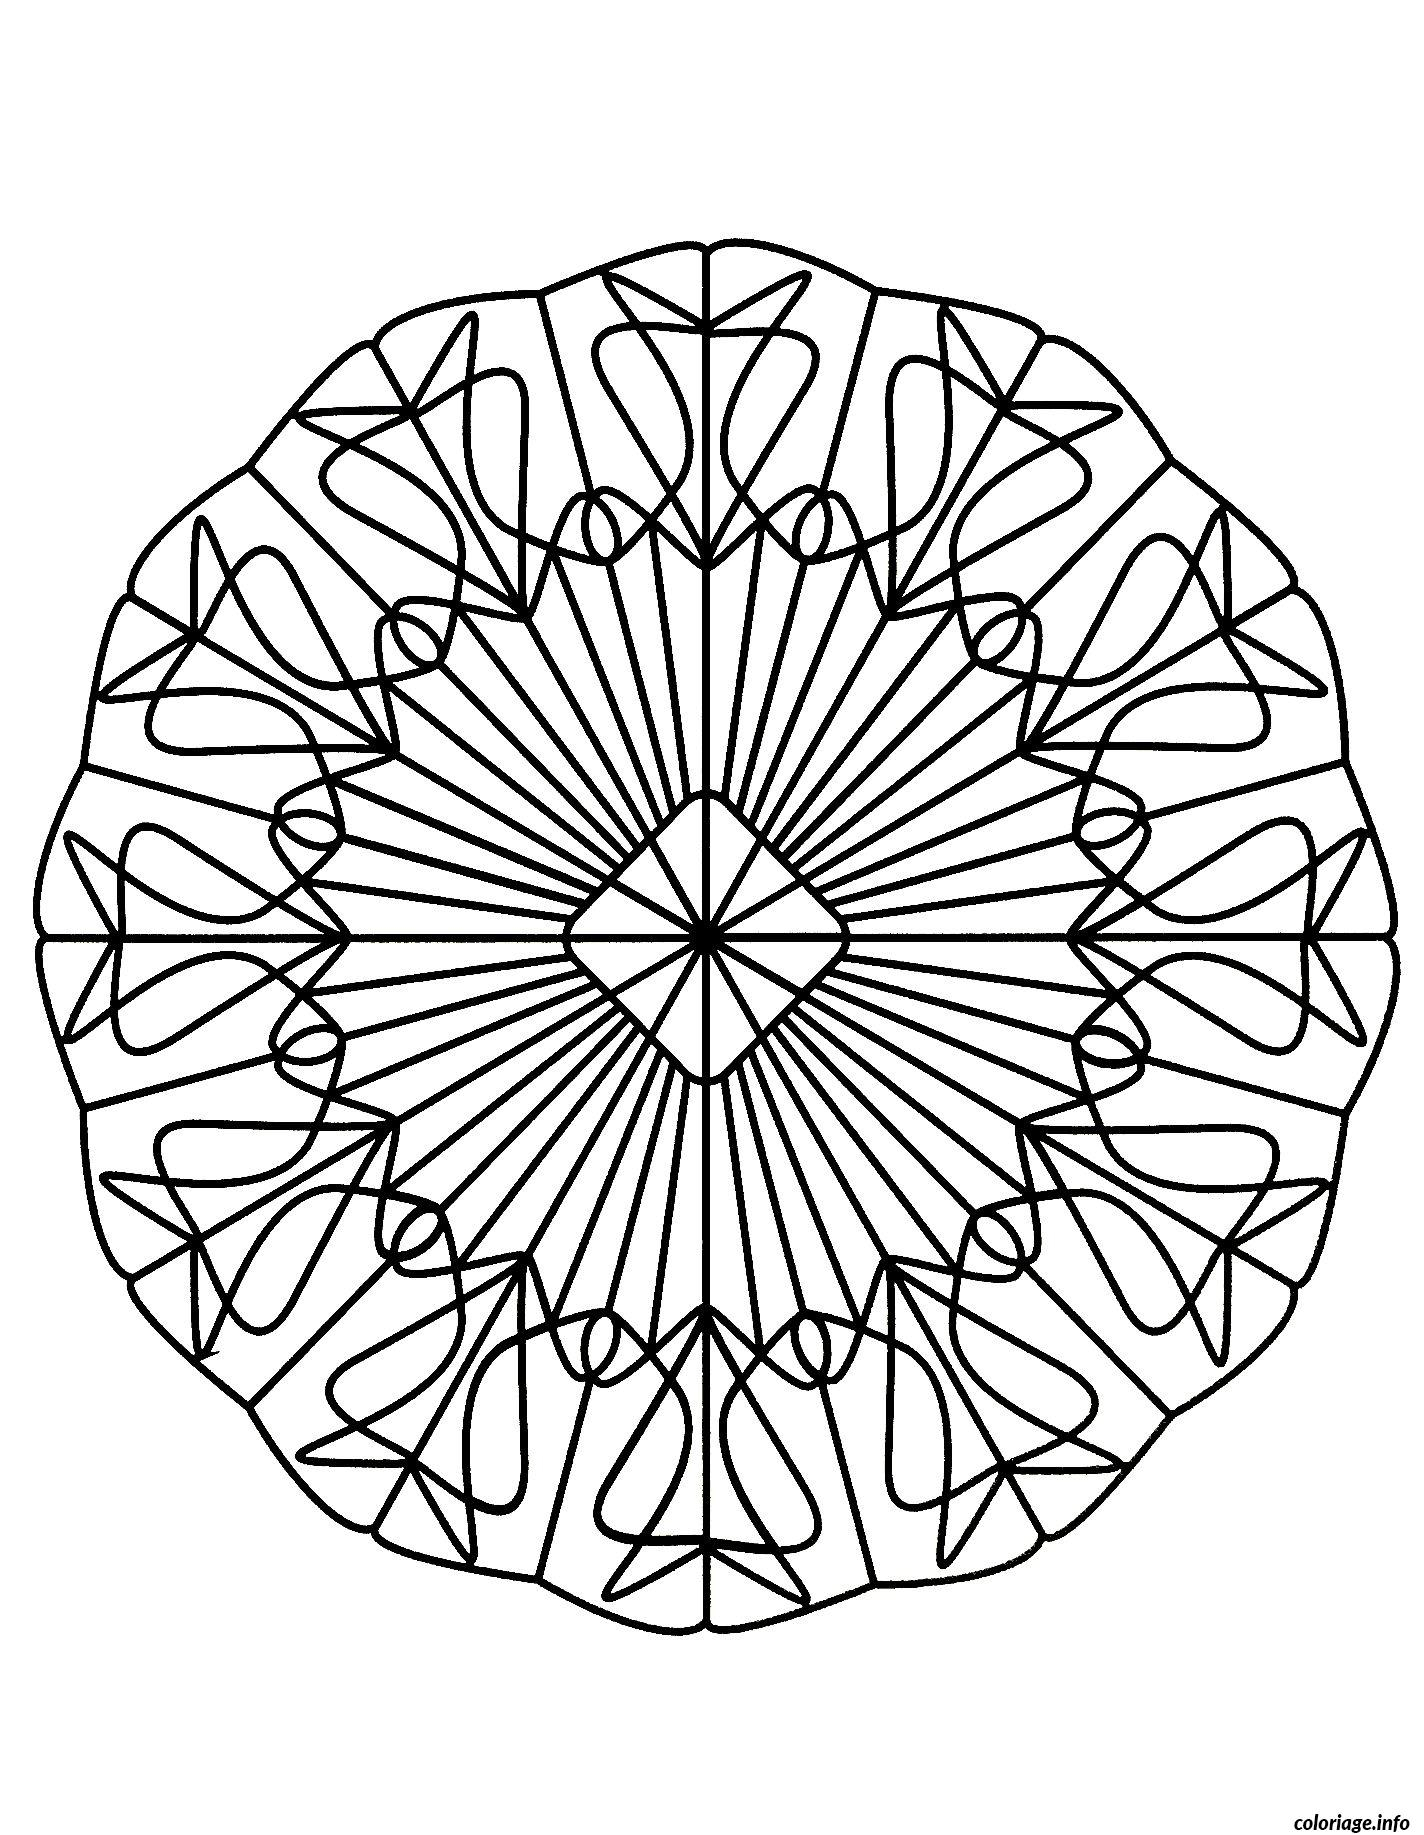 Coloriage Mandalas To Download For Free 20 Dessin Mandala encequiconcerne Coloriage De Mandala Difficile A Imprimer